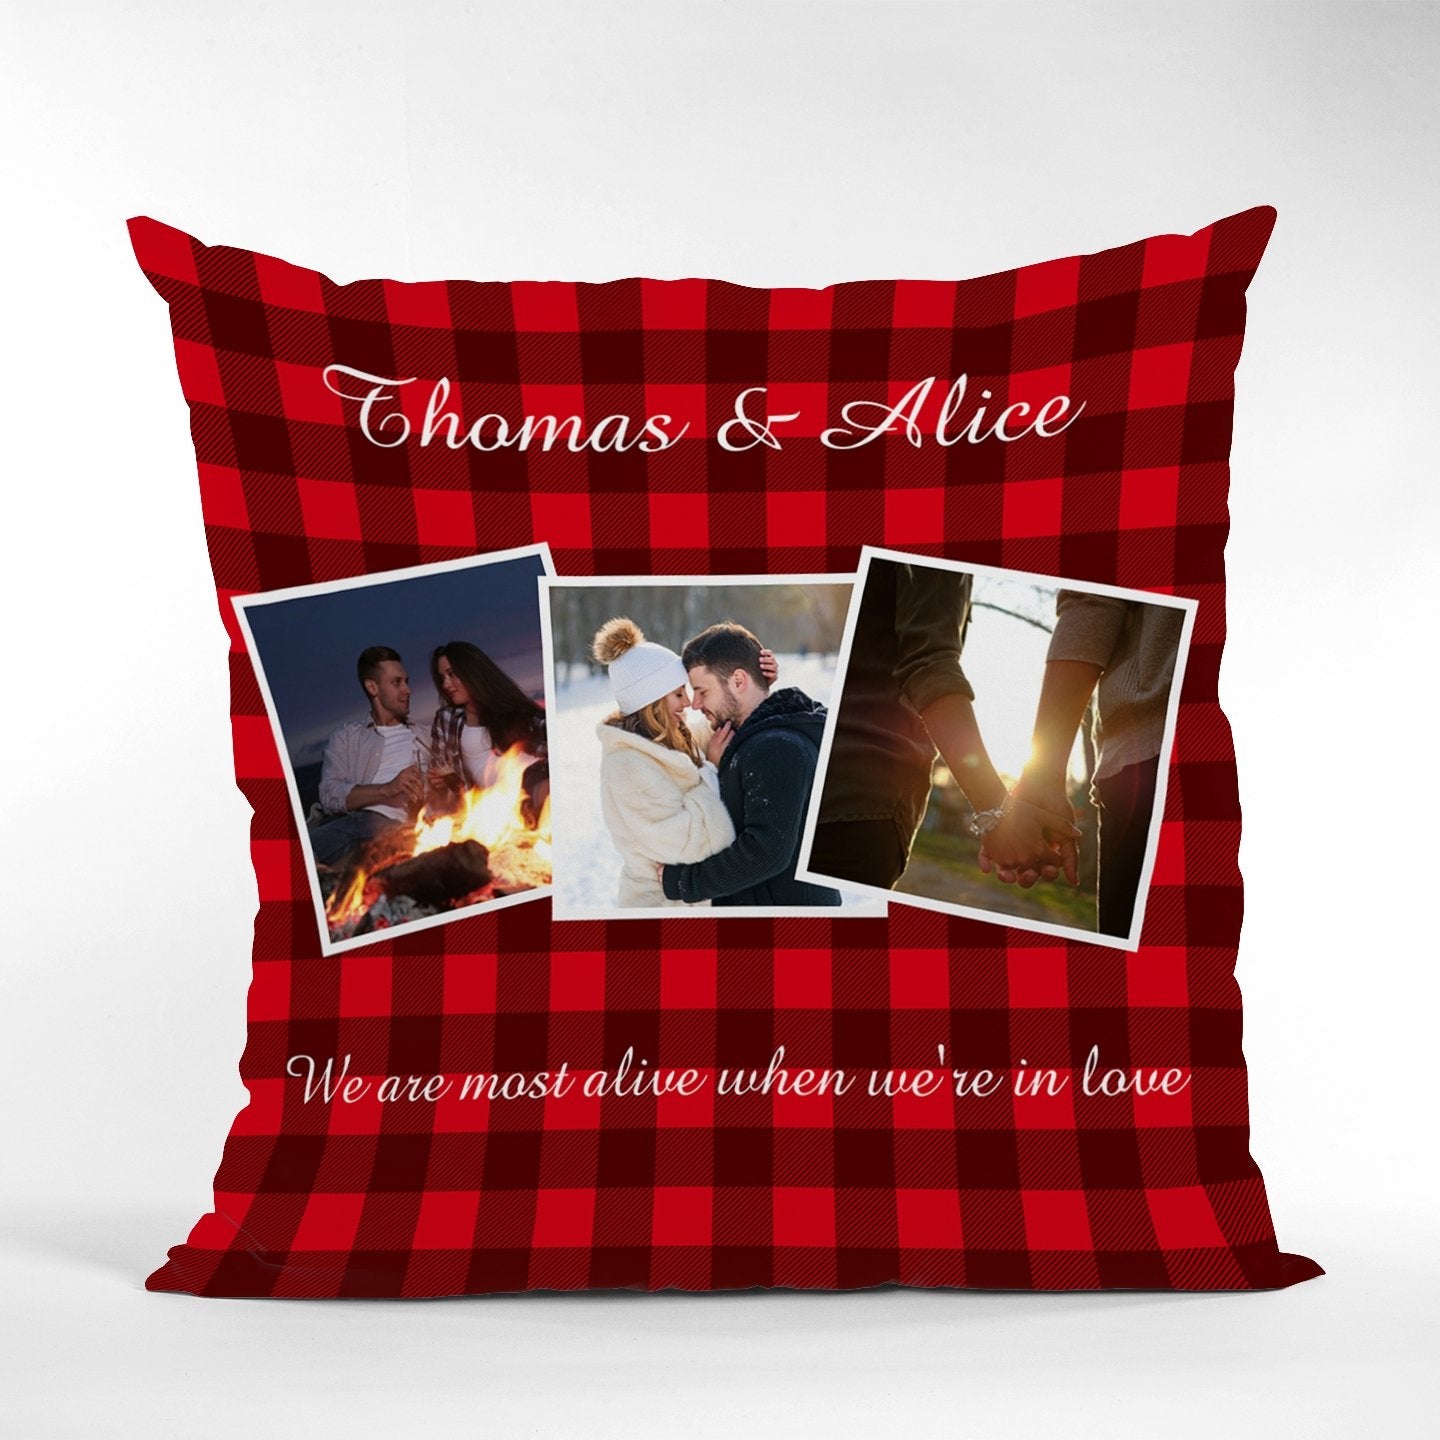 Custom Photo Collage, Customizable Text, 3 Picture Pillow